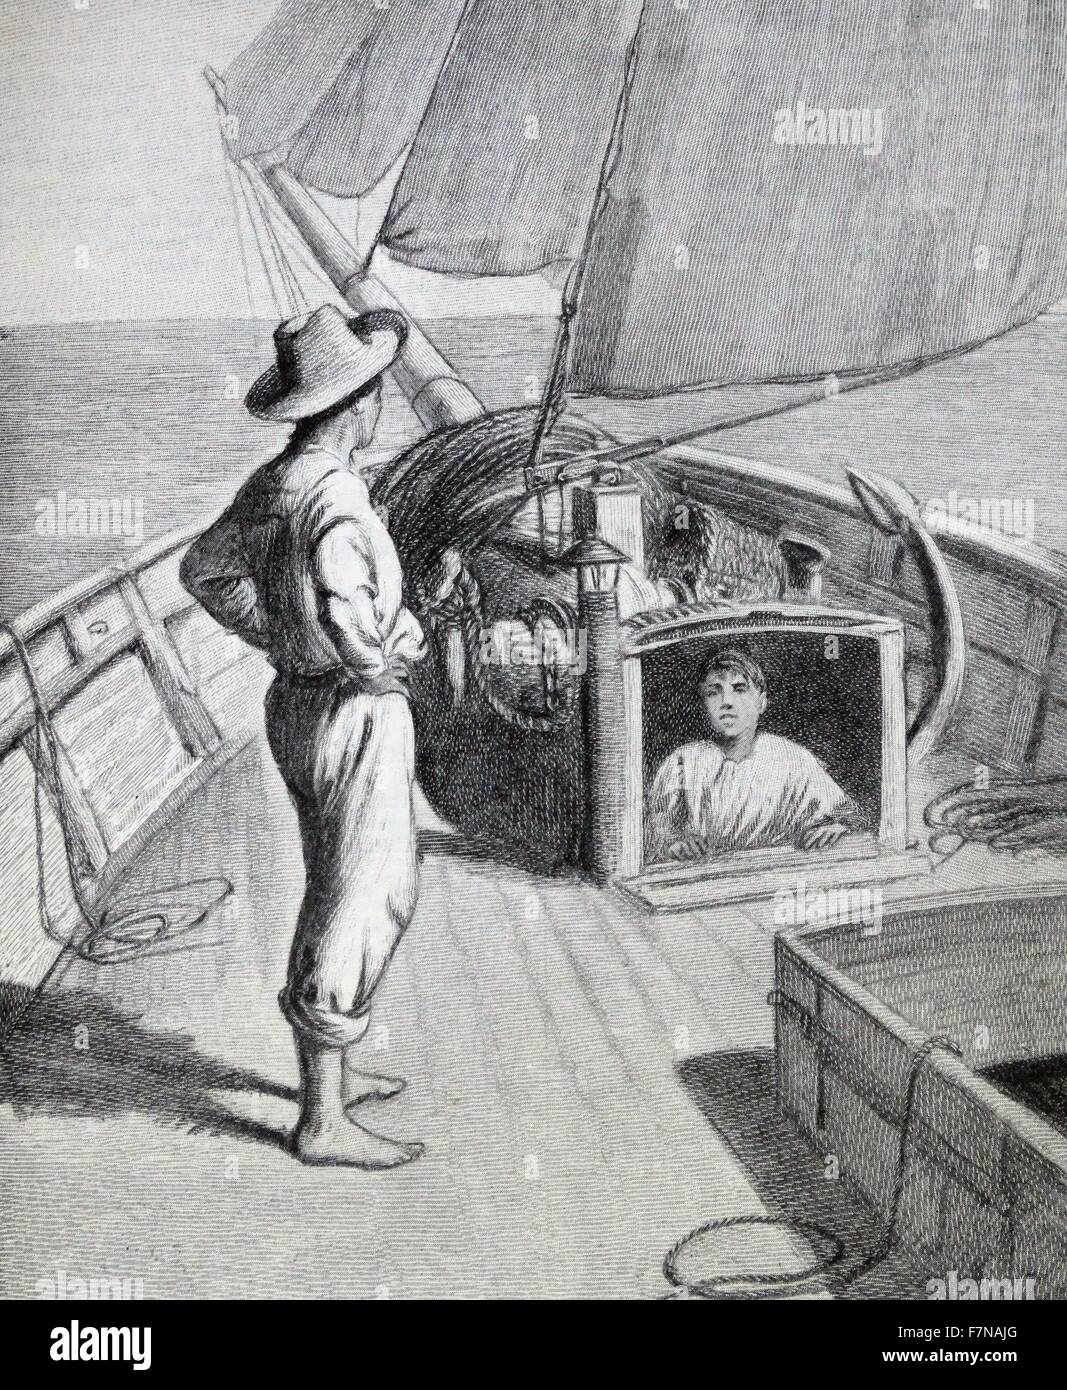 Illustration from a book depicting a young man standing on the deck whilst being watched by a young boy. Dated 1913 Stock Photo